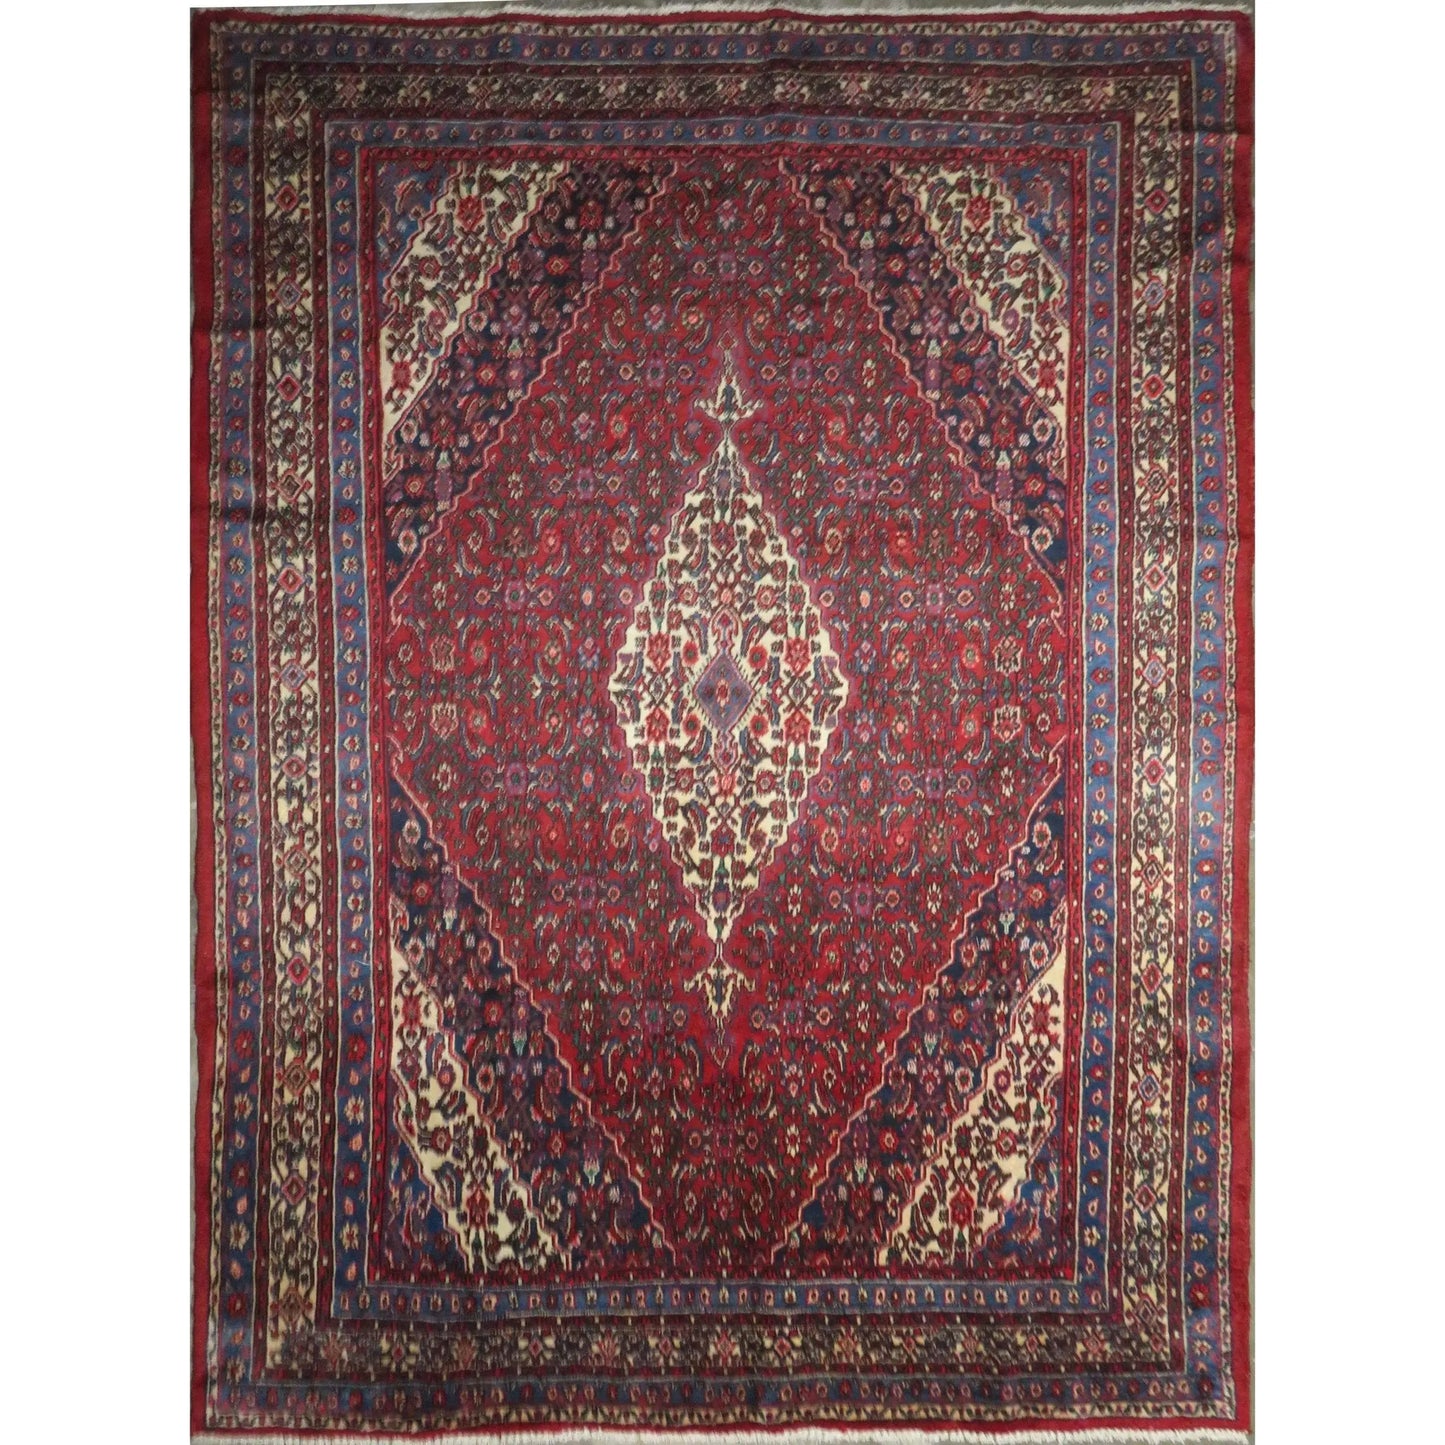 Hand-Knotted Persian Wool Rug _ Luxurious Vintage Design, 11'7" x 8'1", Artisan Crafted